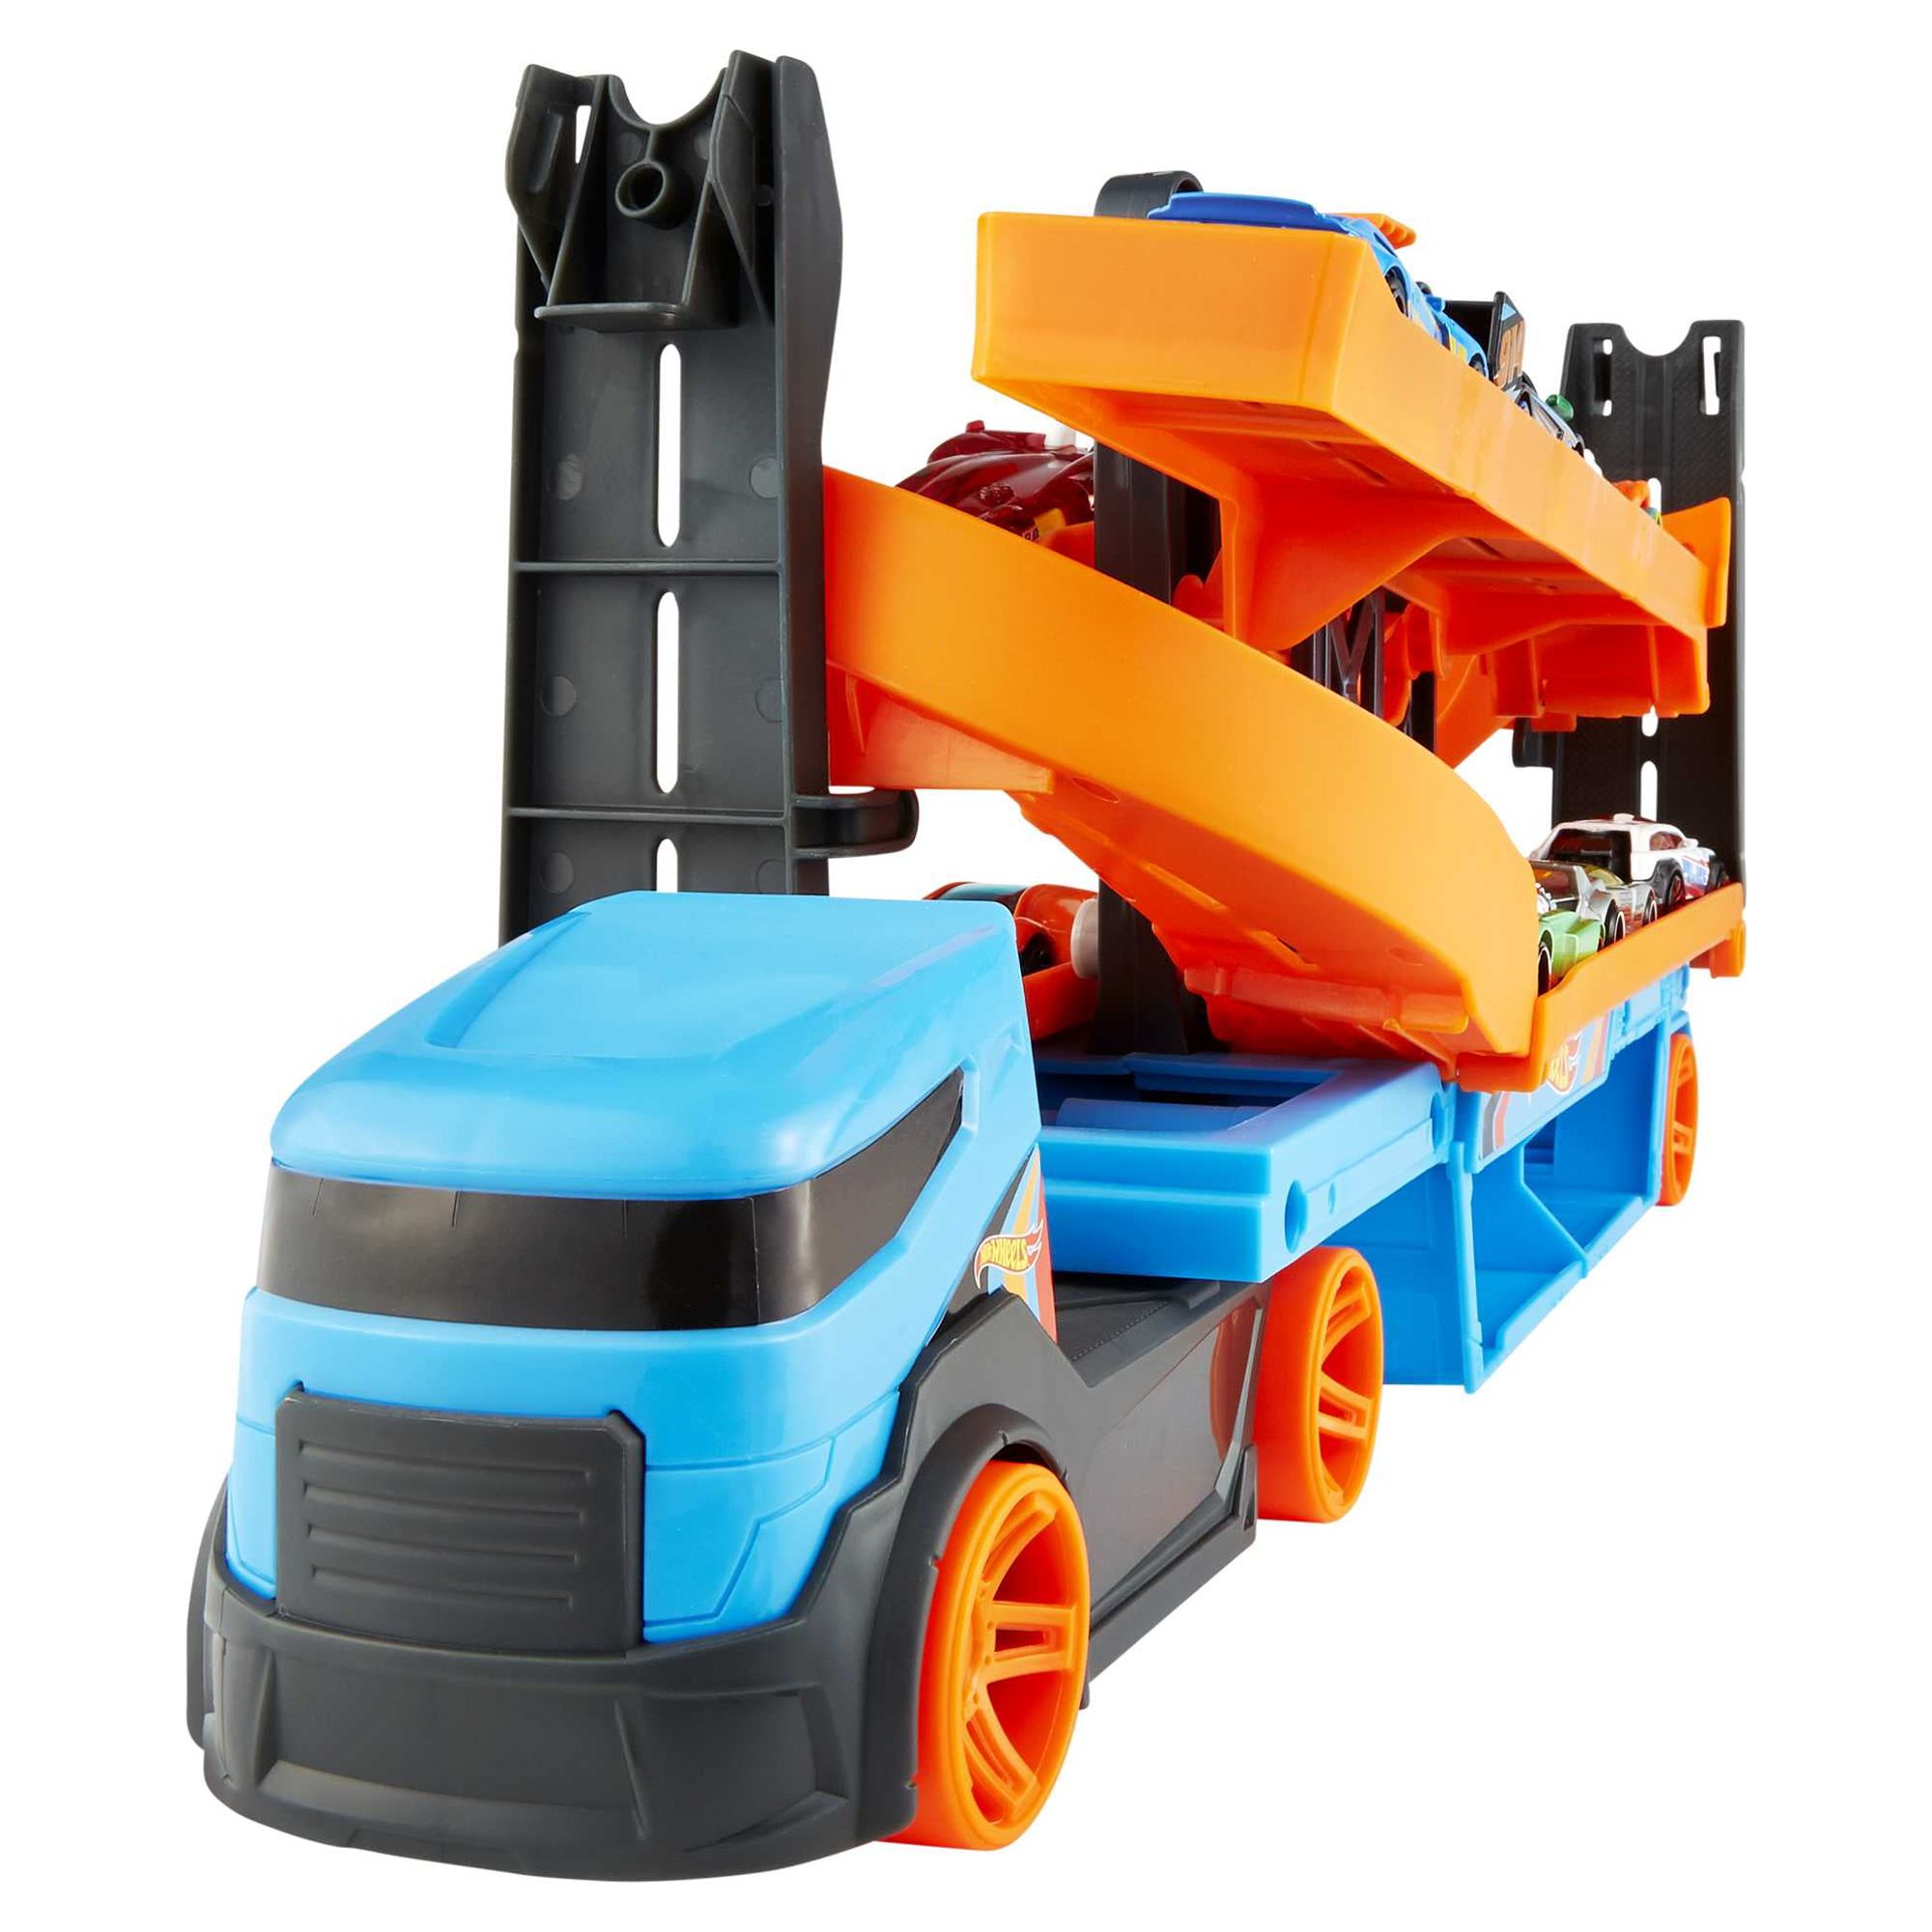 Hot Wheels Lift & Launch Hauler Toy Truck with 10 Cars in 1:64 Scale, Transporter Stores 20 Vehicles - image 2 of 6